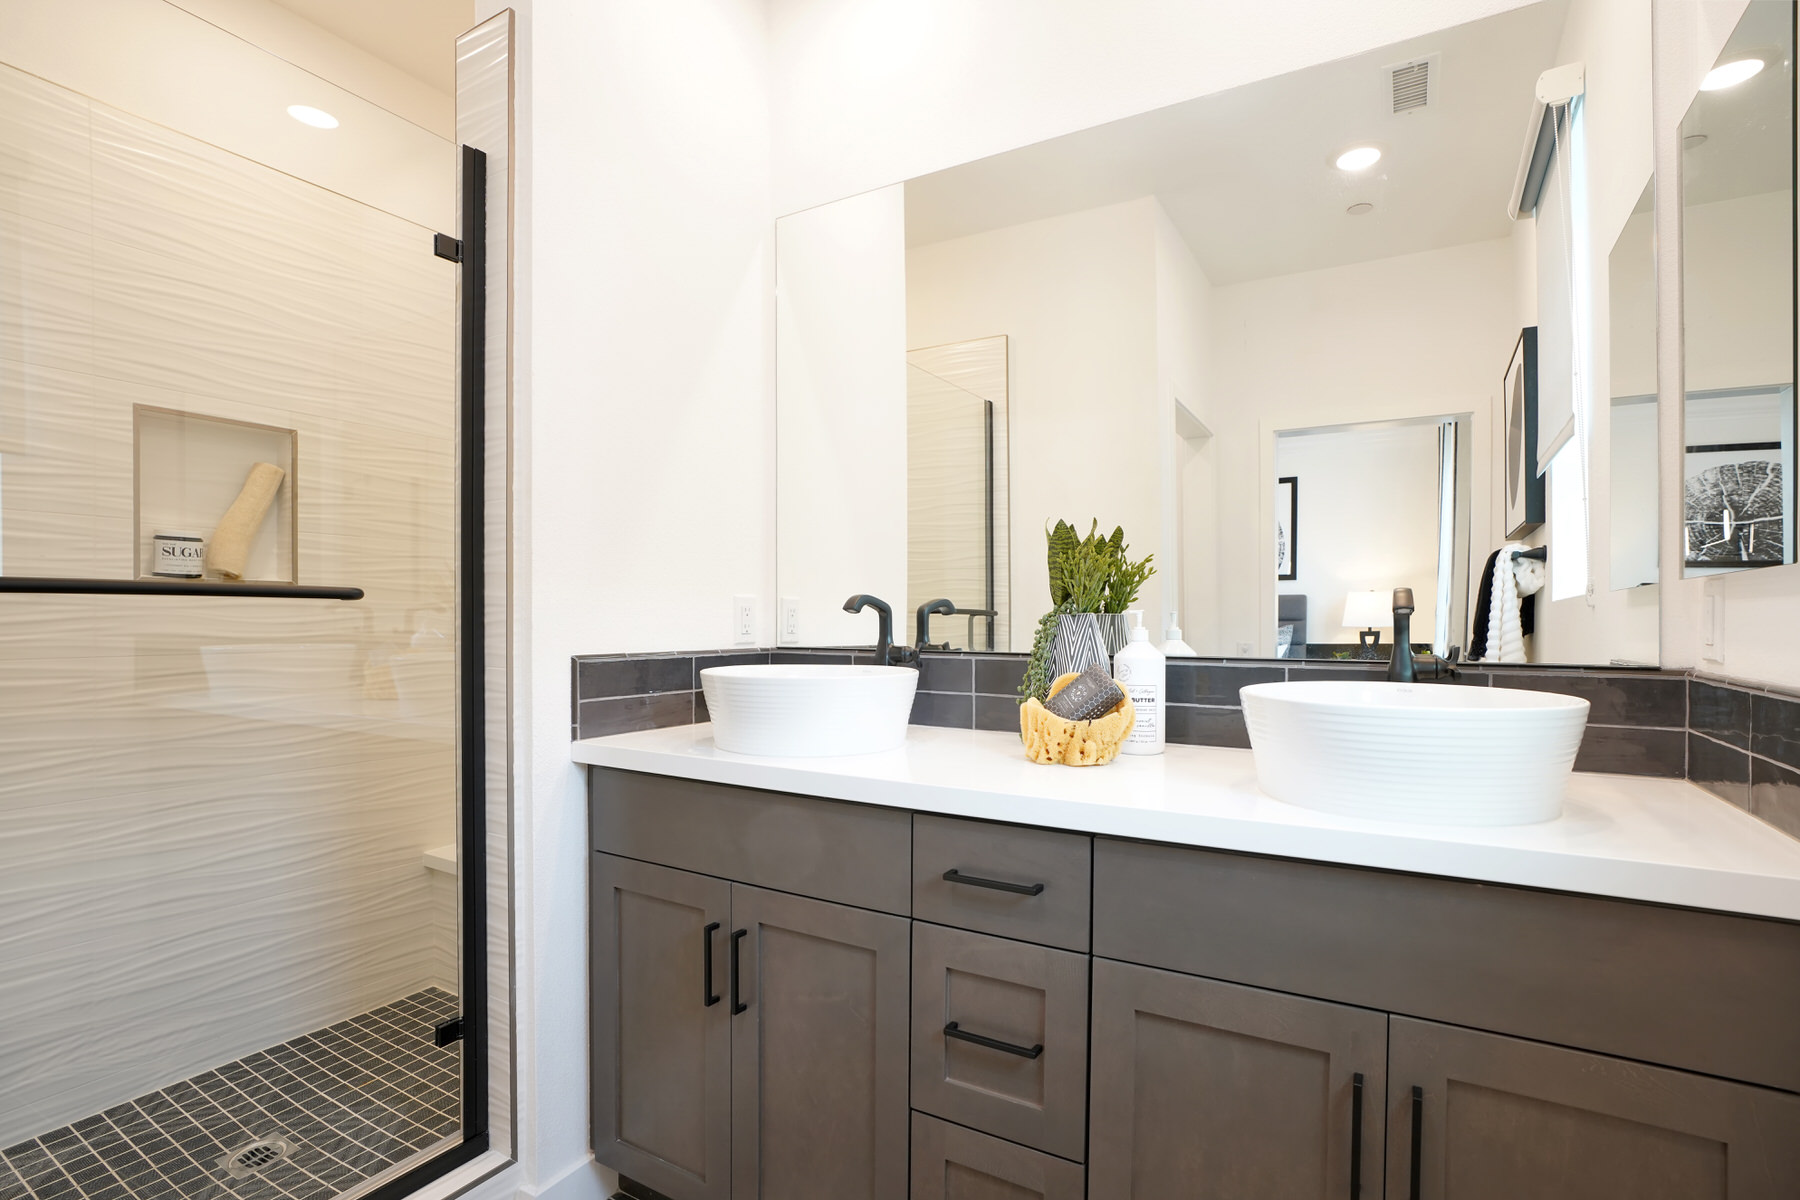 Primary Bath in Plan 1 at Townes at Magnolia by Melia Homes in Anaheim, CA